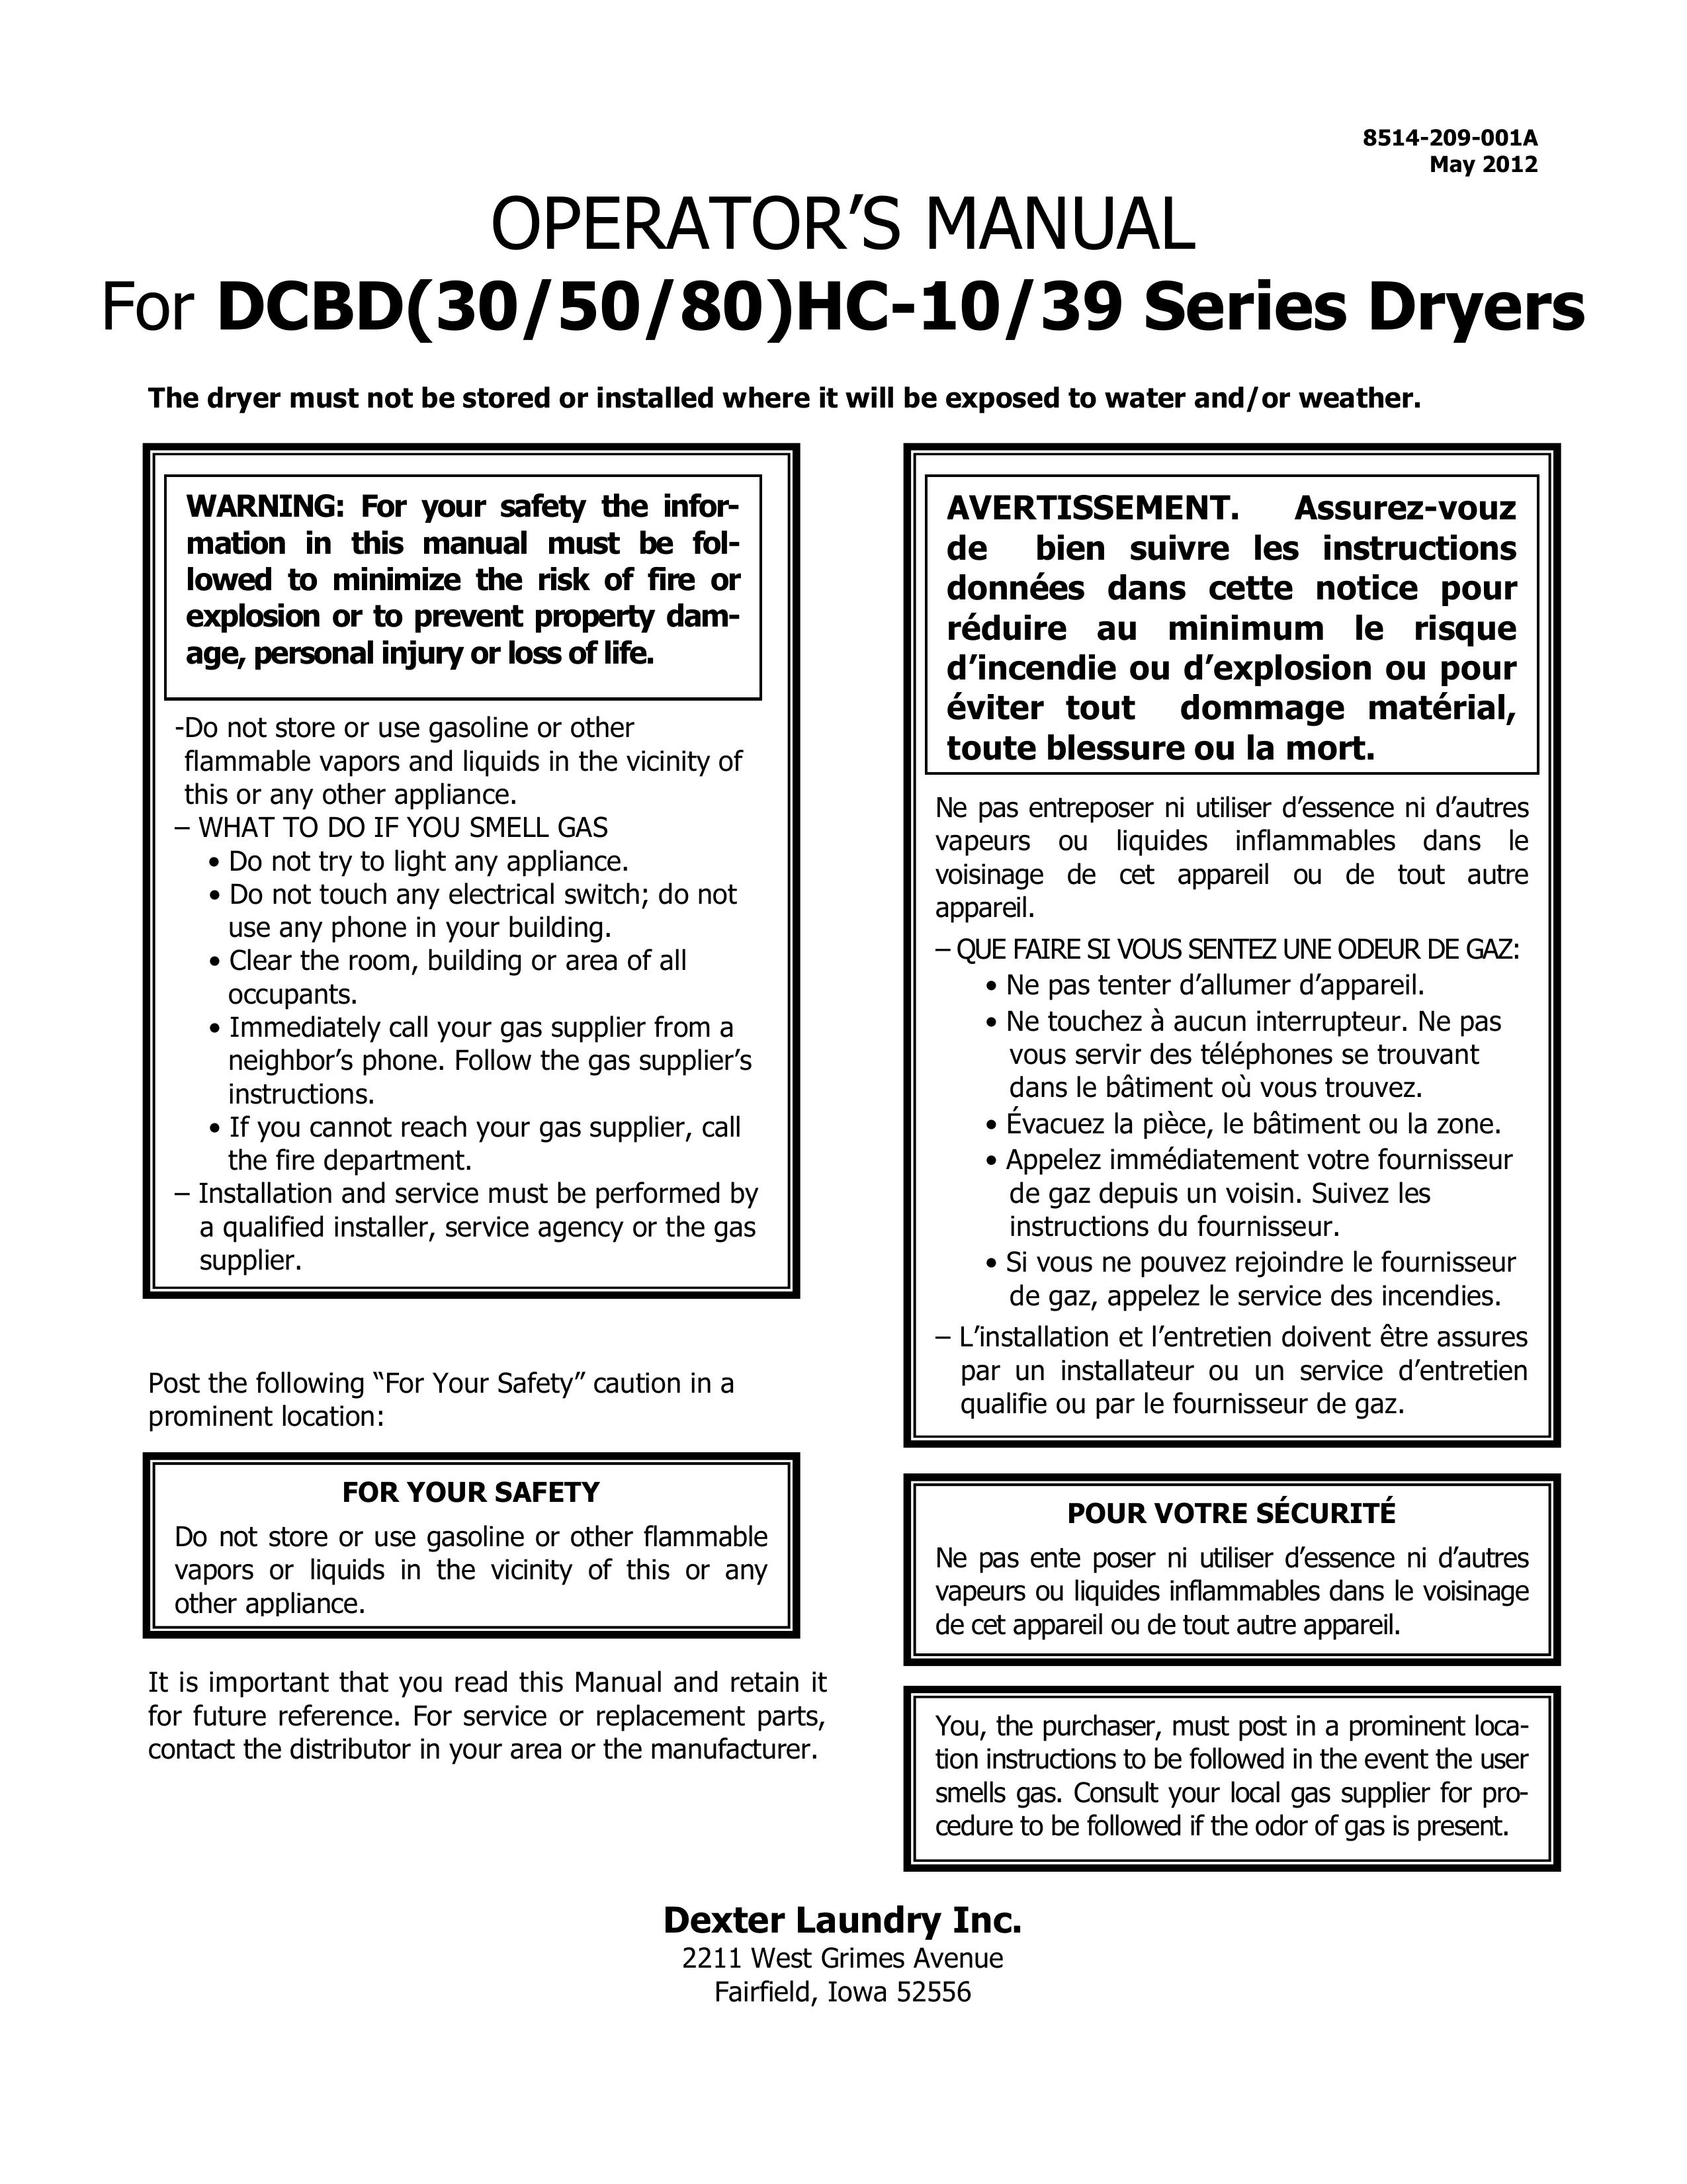 MRV Communications DCBD 30 Clothes Dryer User Manual